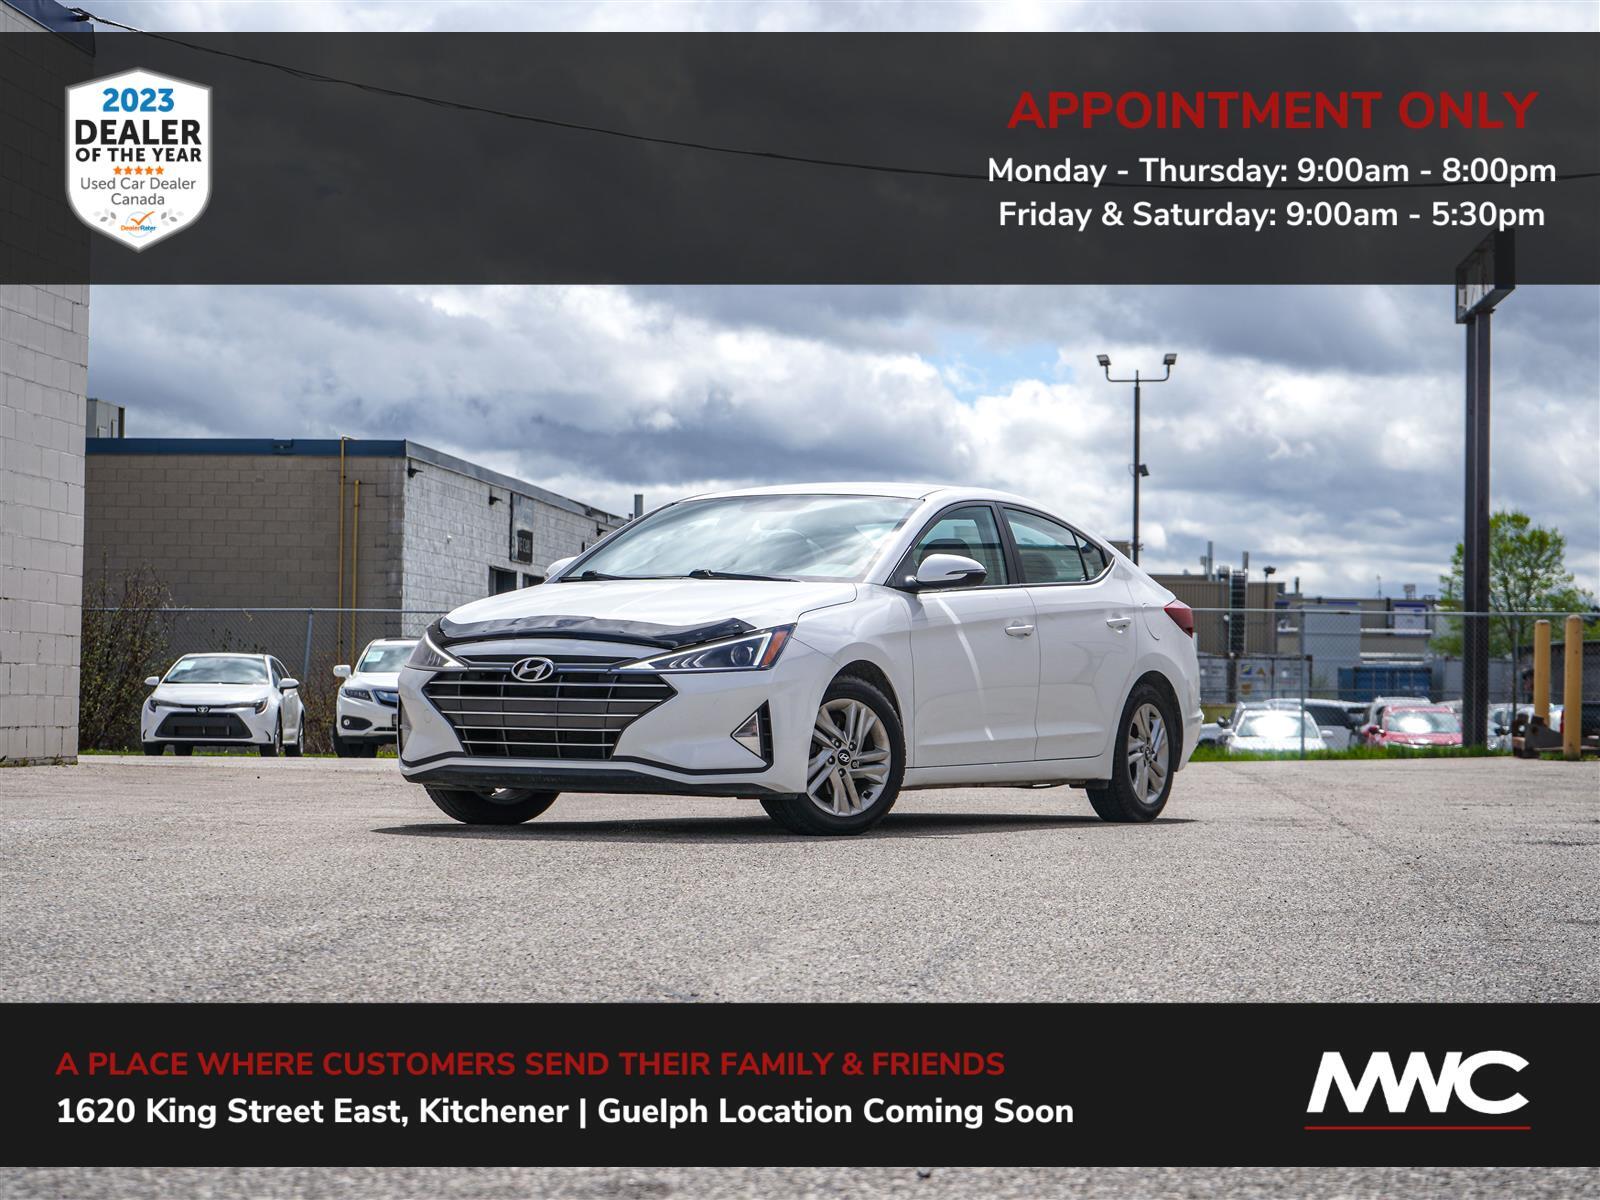 2019 Hyundai Elantra  PREFERRED | 23 IN GUELPH, BY APPT. ONLY